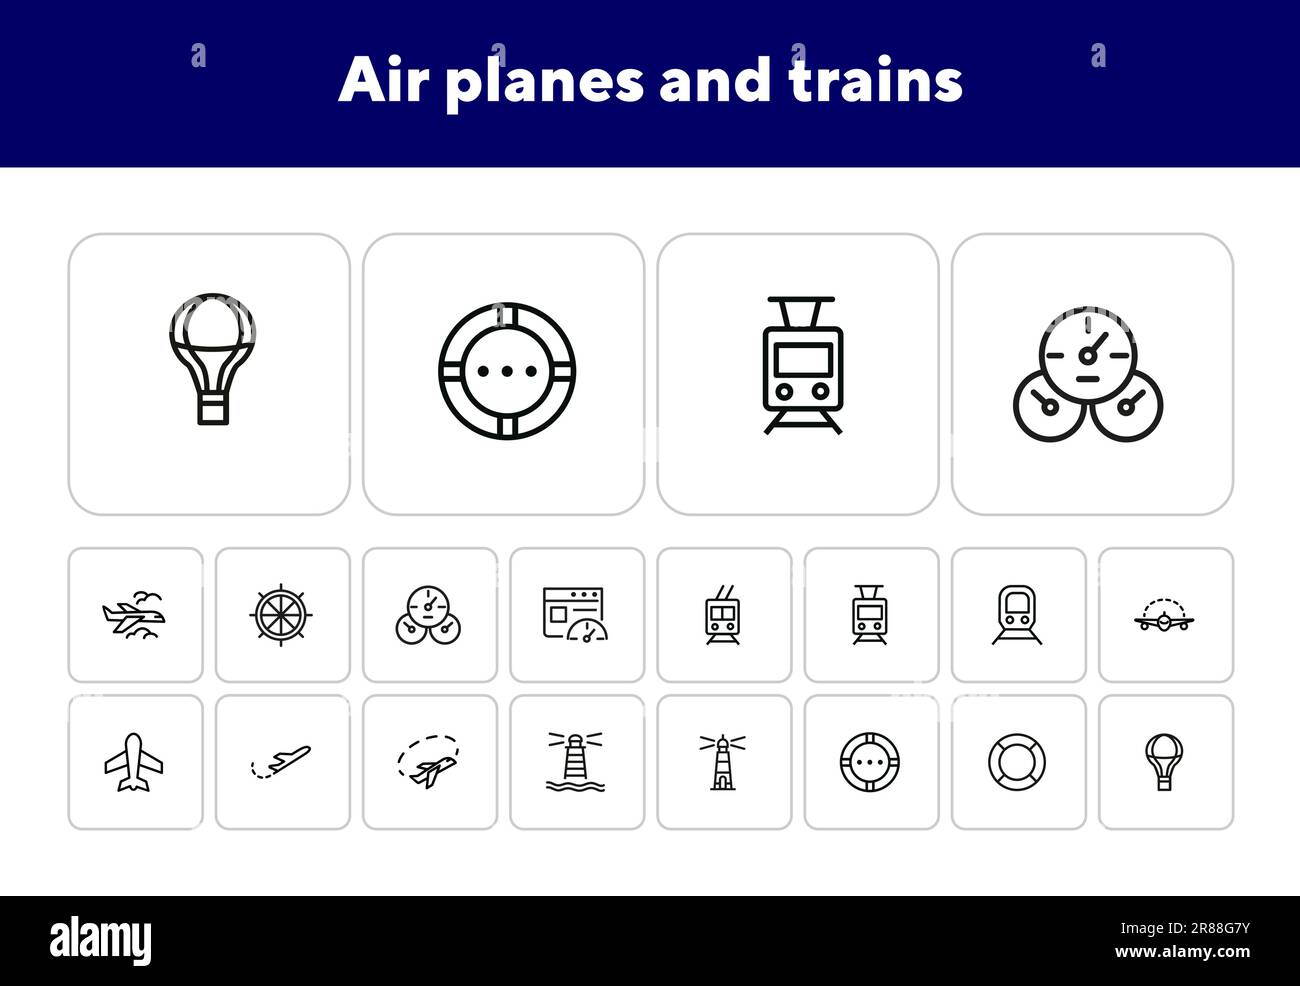 Air planes and trains icons Stock Vector